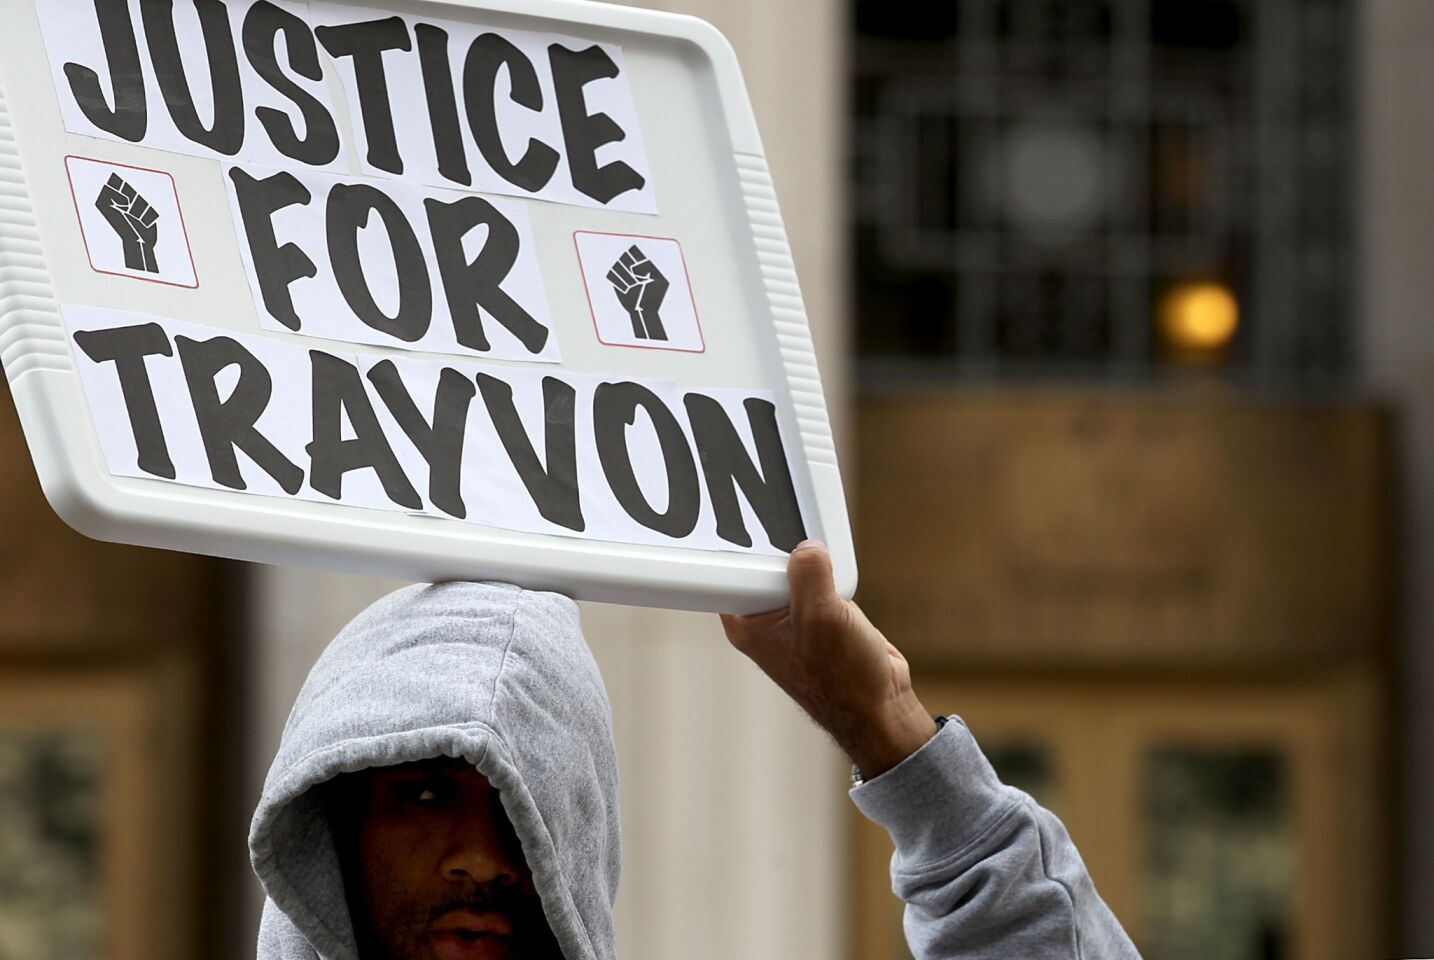 Adam Smith, 43, wears a hoodie at the protest and march in downtown Los Angeles. Trayvon Martin was wearing a hoodie the night he was killed.